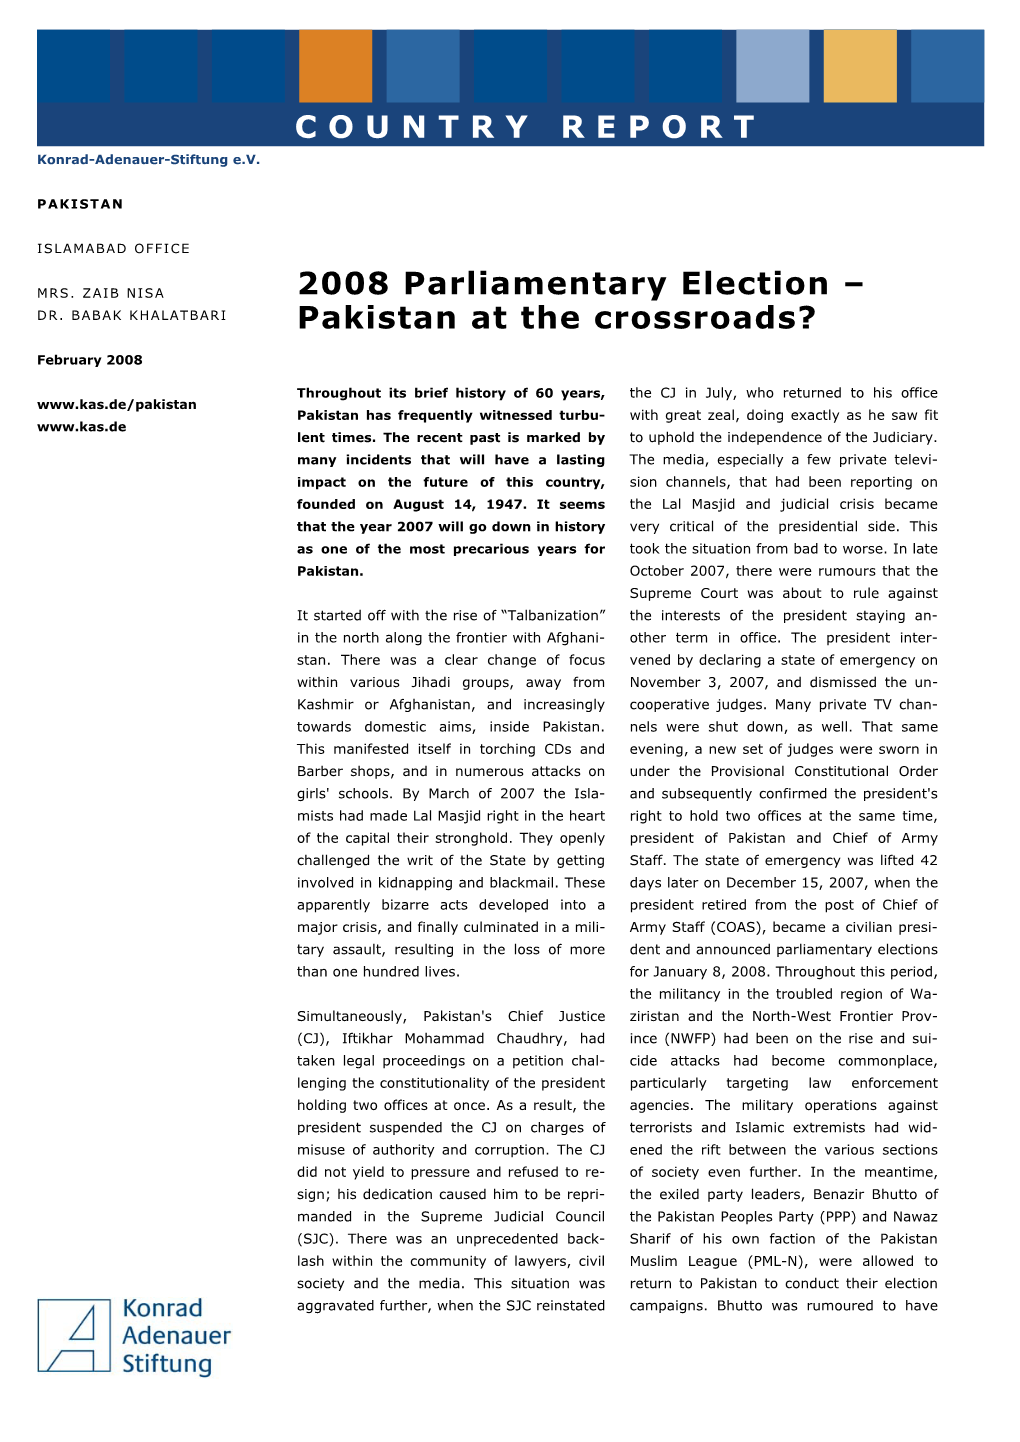 COUNTRY REPORT 2008 Parliamentary Election – Pakistan at the Crossroads?